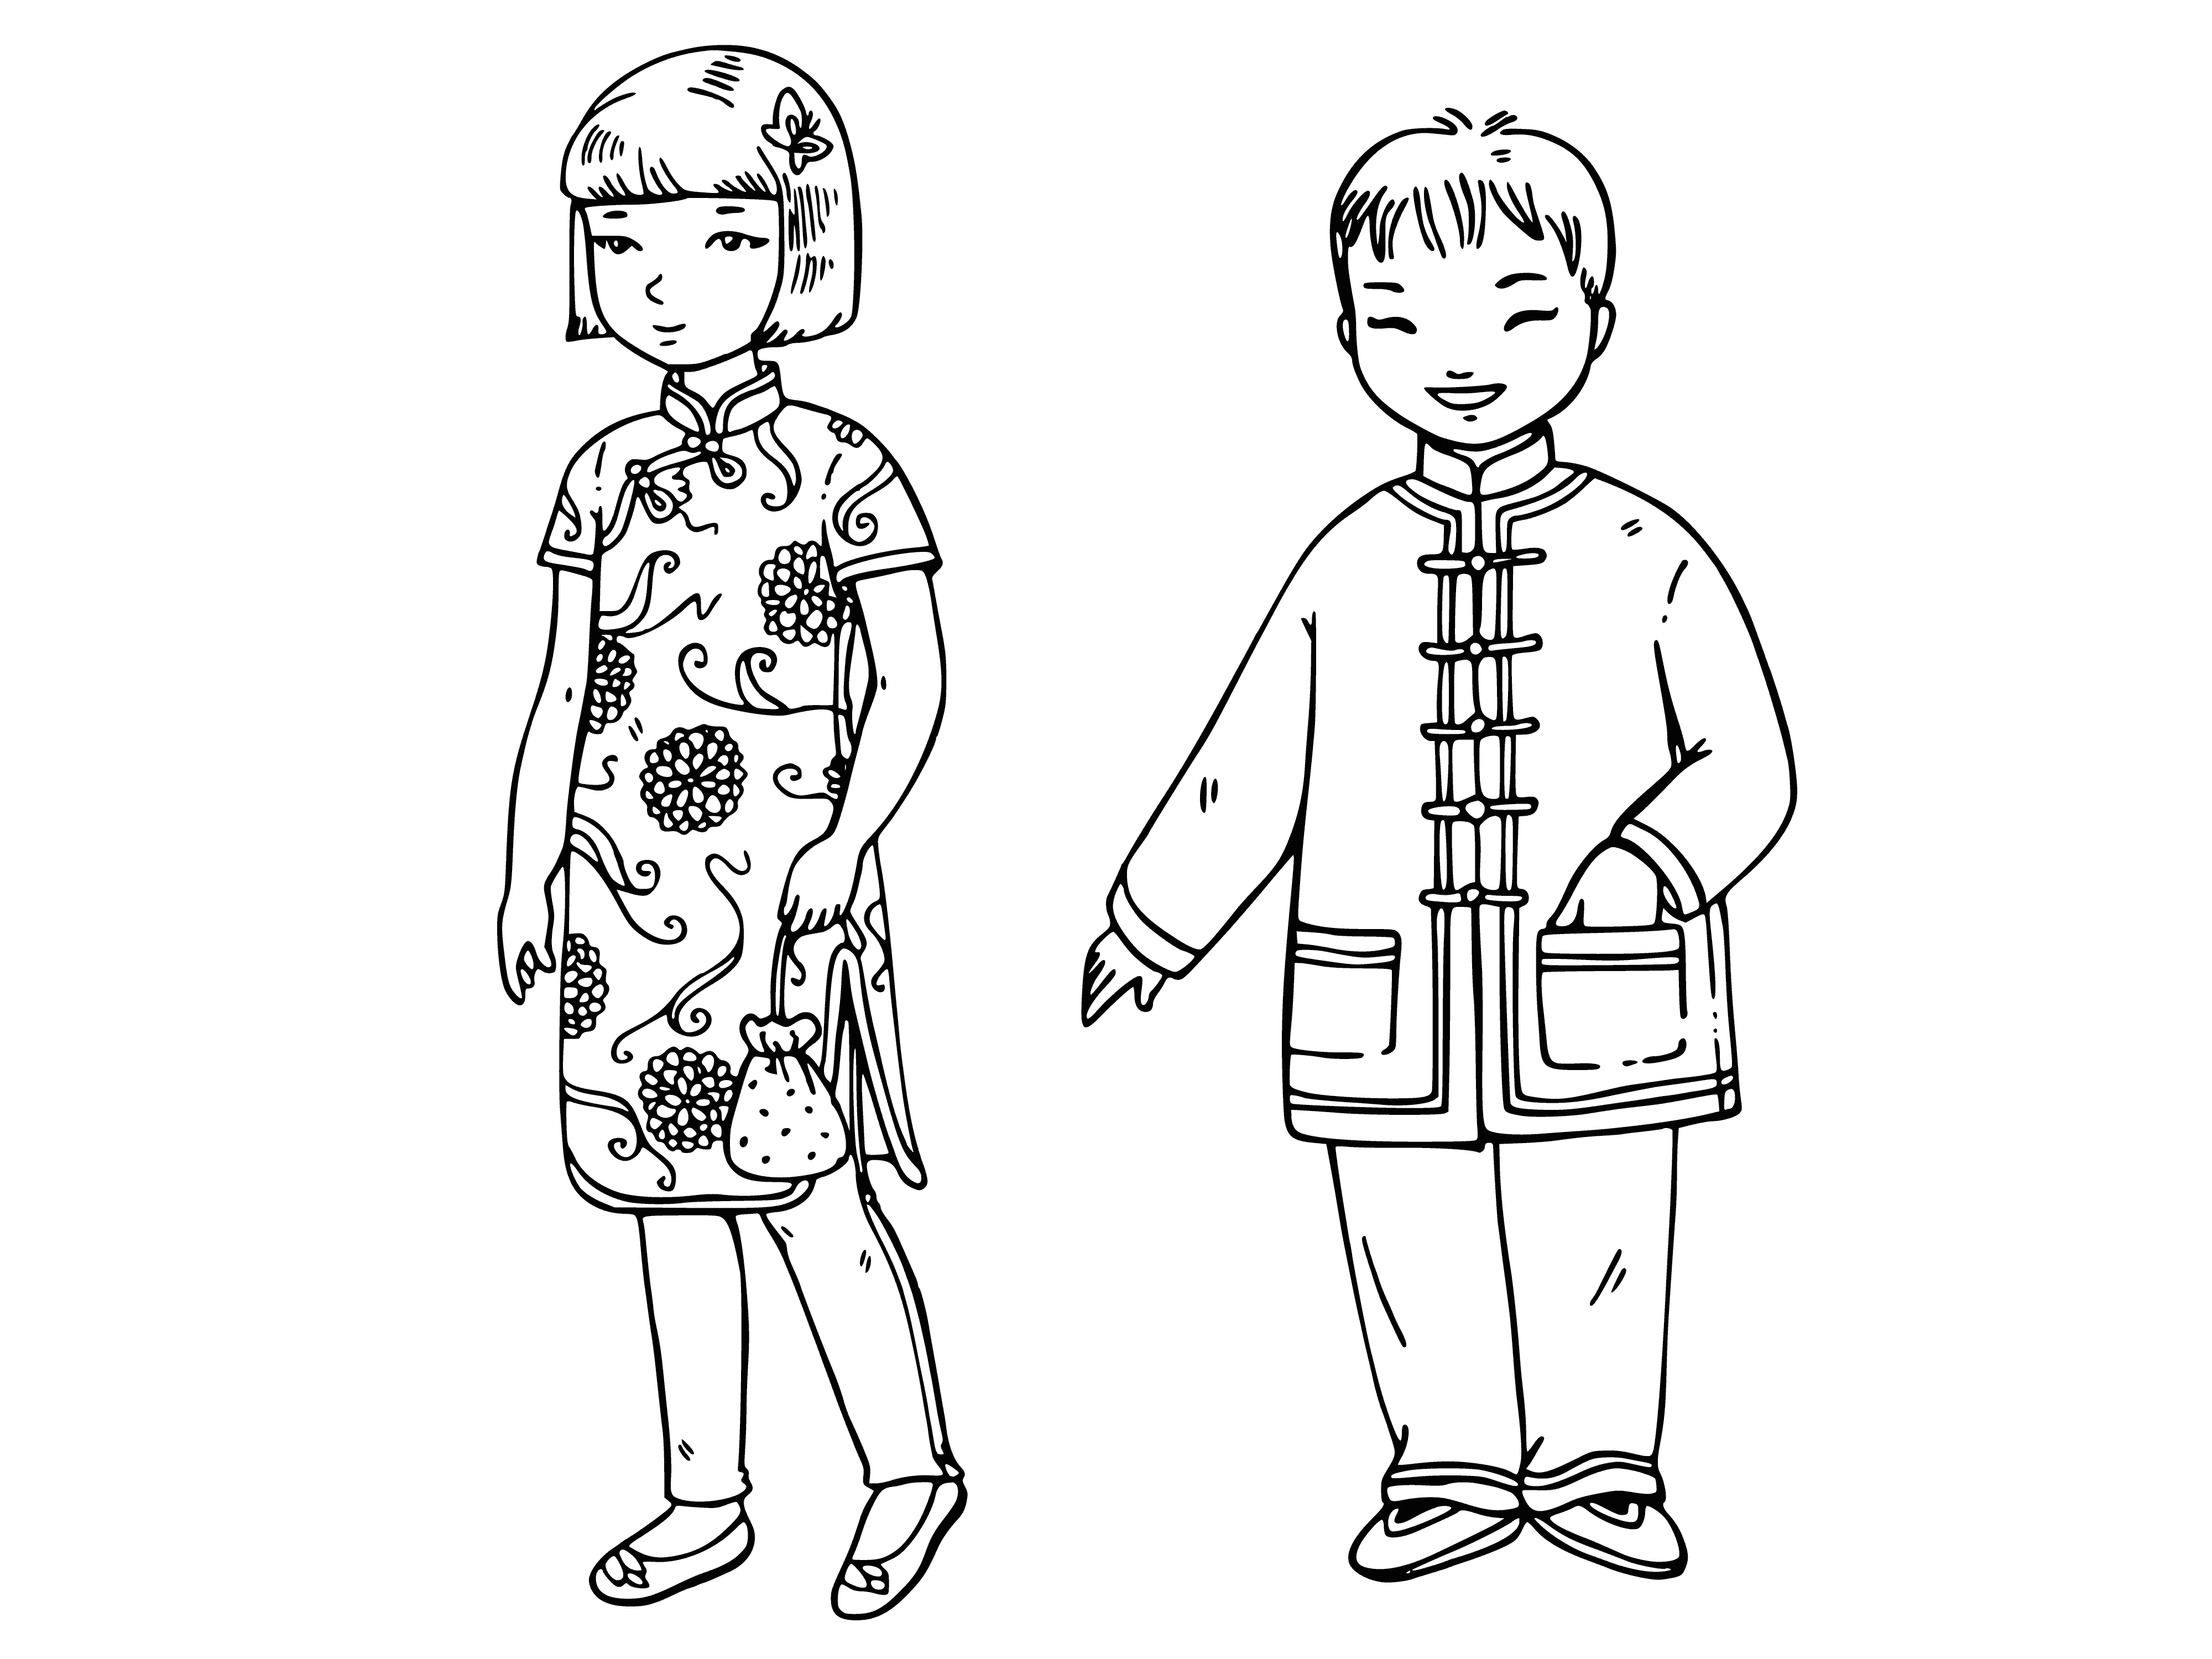 coloring page: Two Chinese children wearing trad. National costumes: girl red dress, gold detailing; boy blue robe, white detailing. Both with straw hats. #OrientalCulture